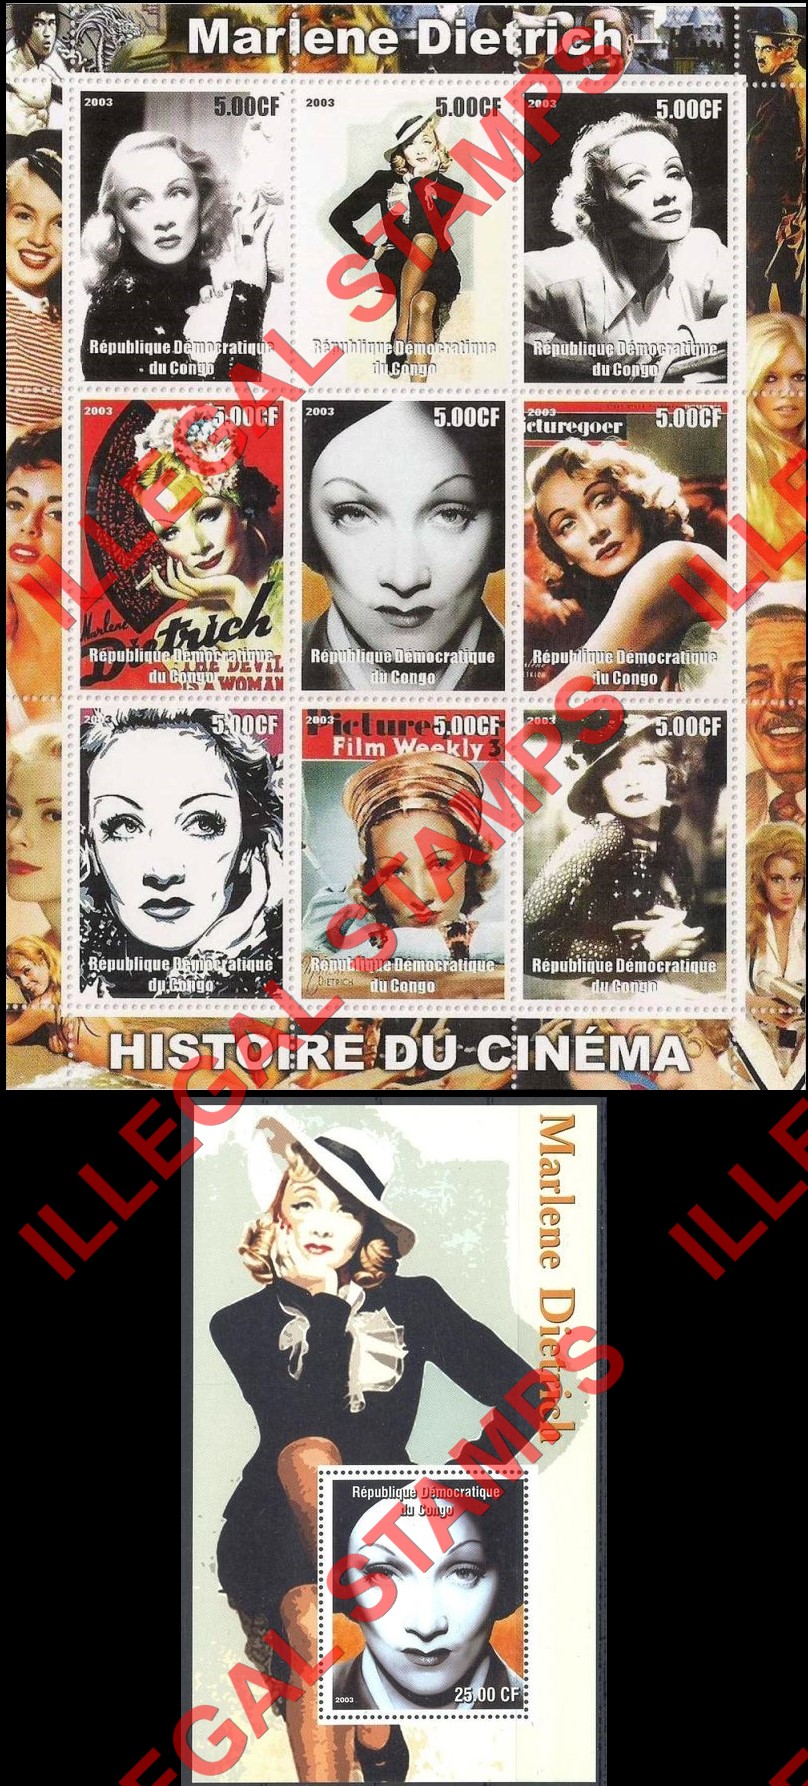 Congo Democratic Republic 2003 History of Cinema Marlene Dietrich Illegal Stamp Sheet of 9 and Souvenir Sheet of 1